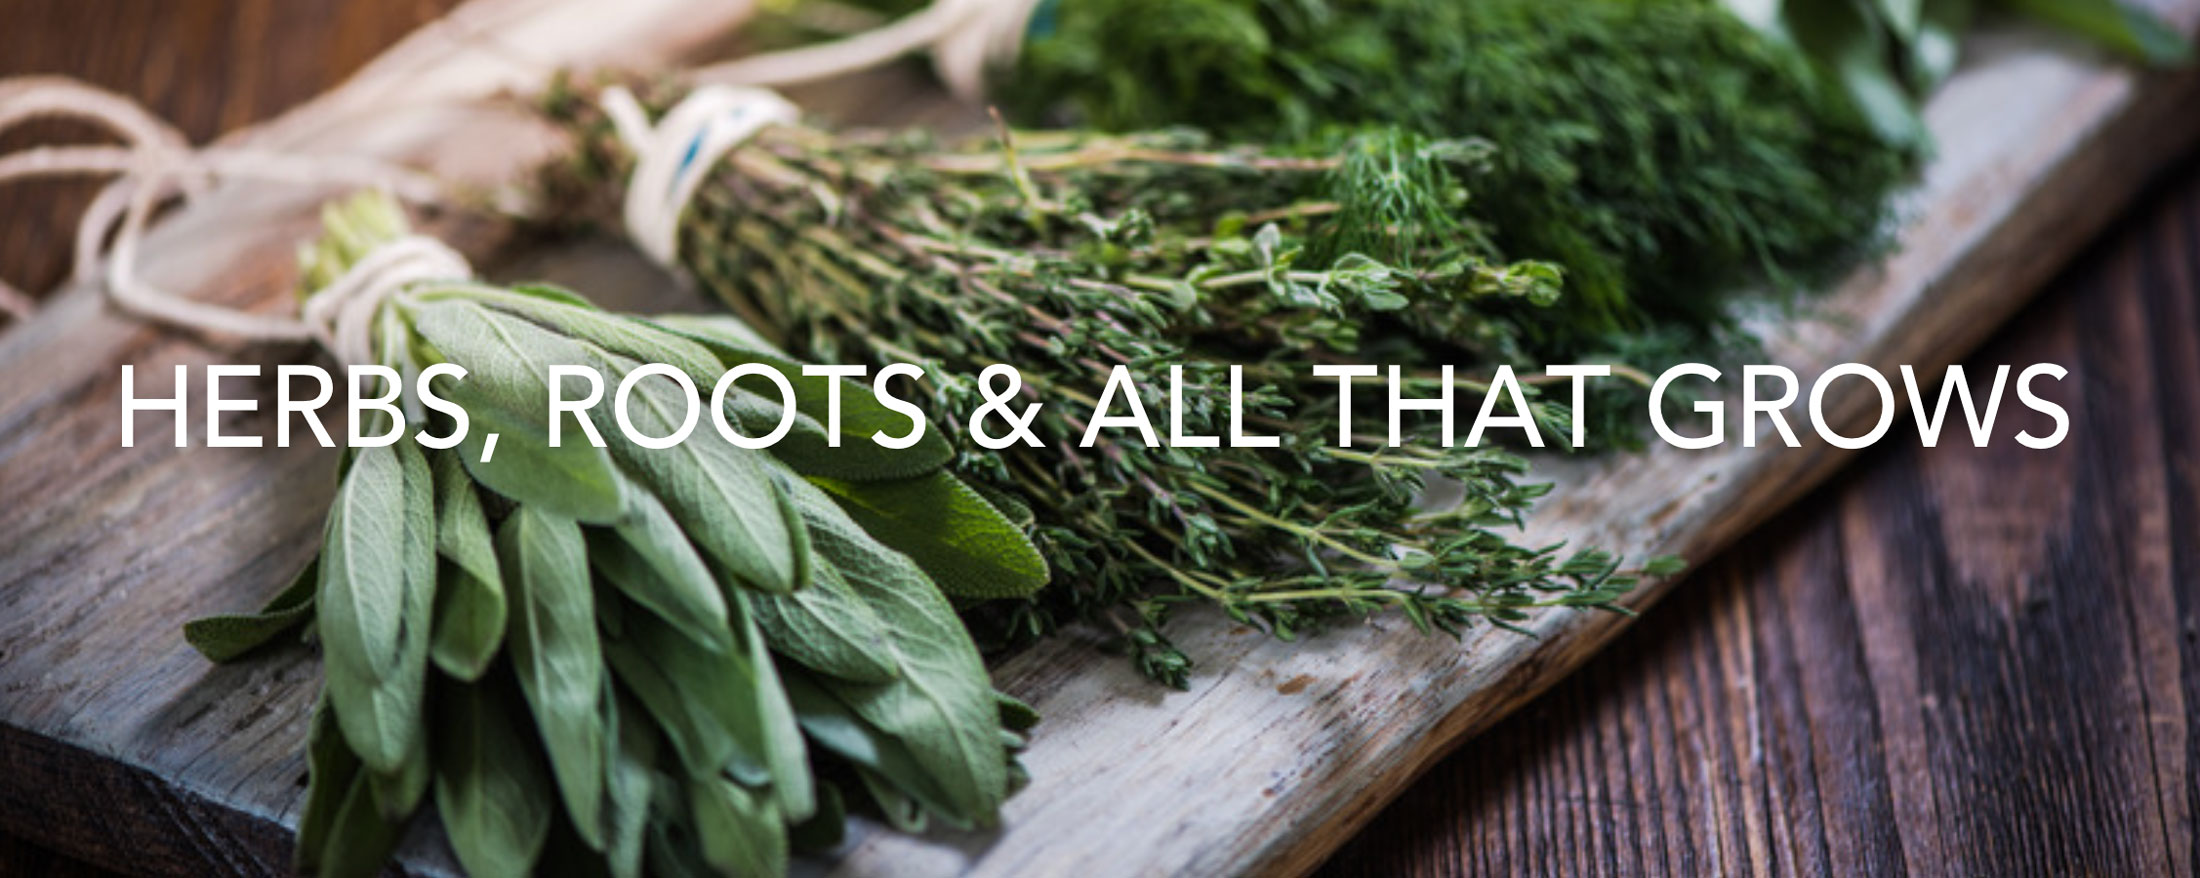 Herbs, Roots & All That Grows